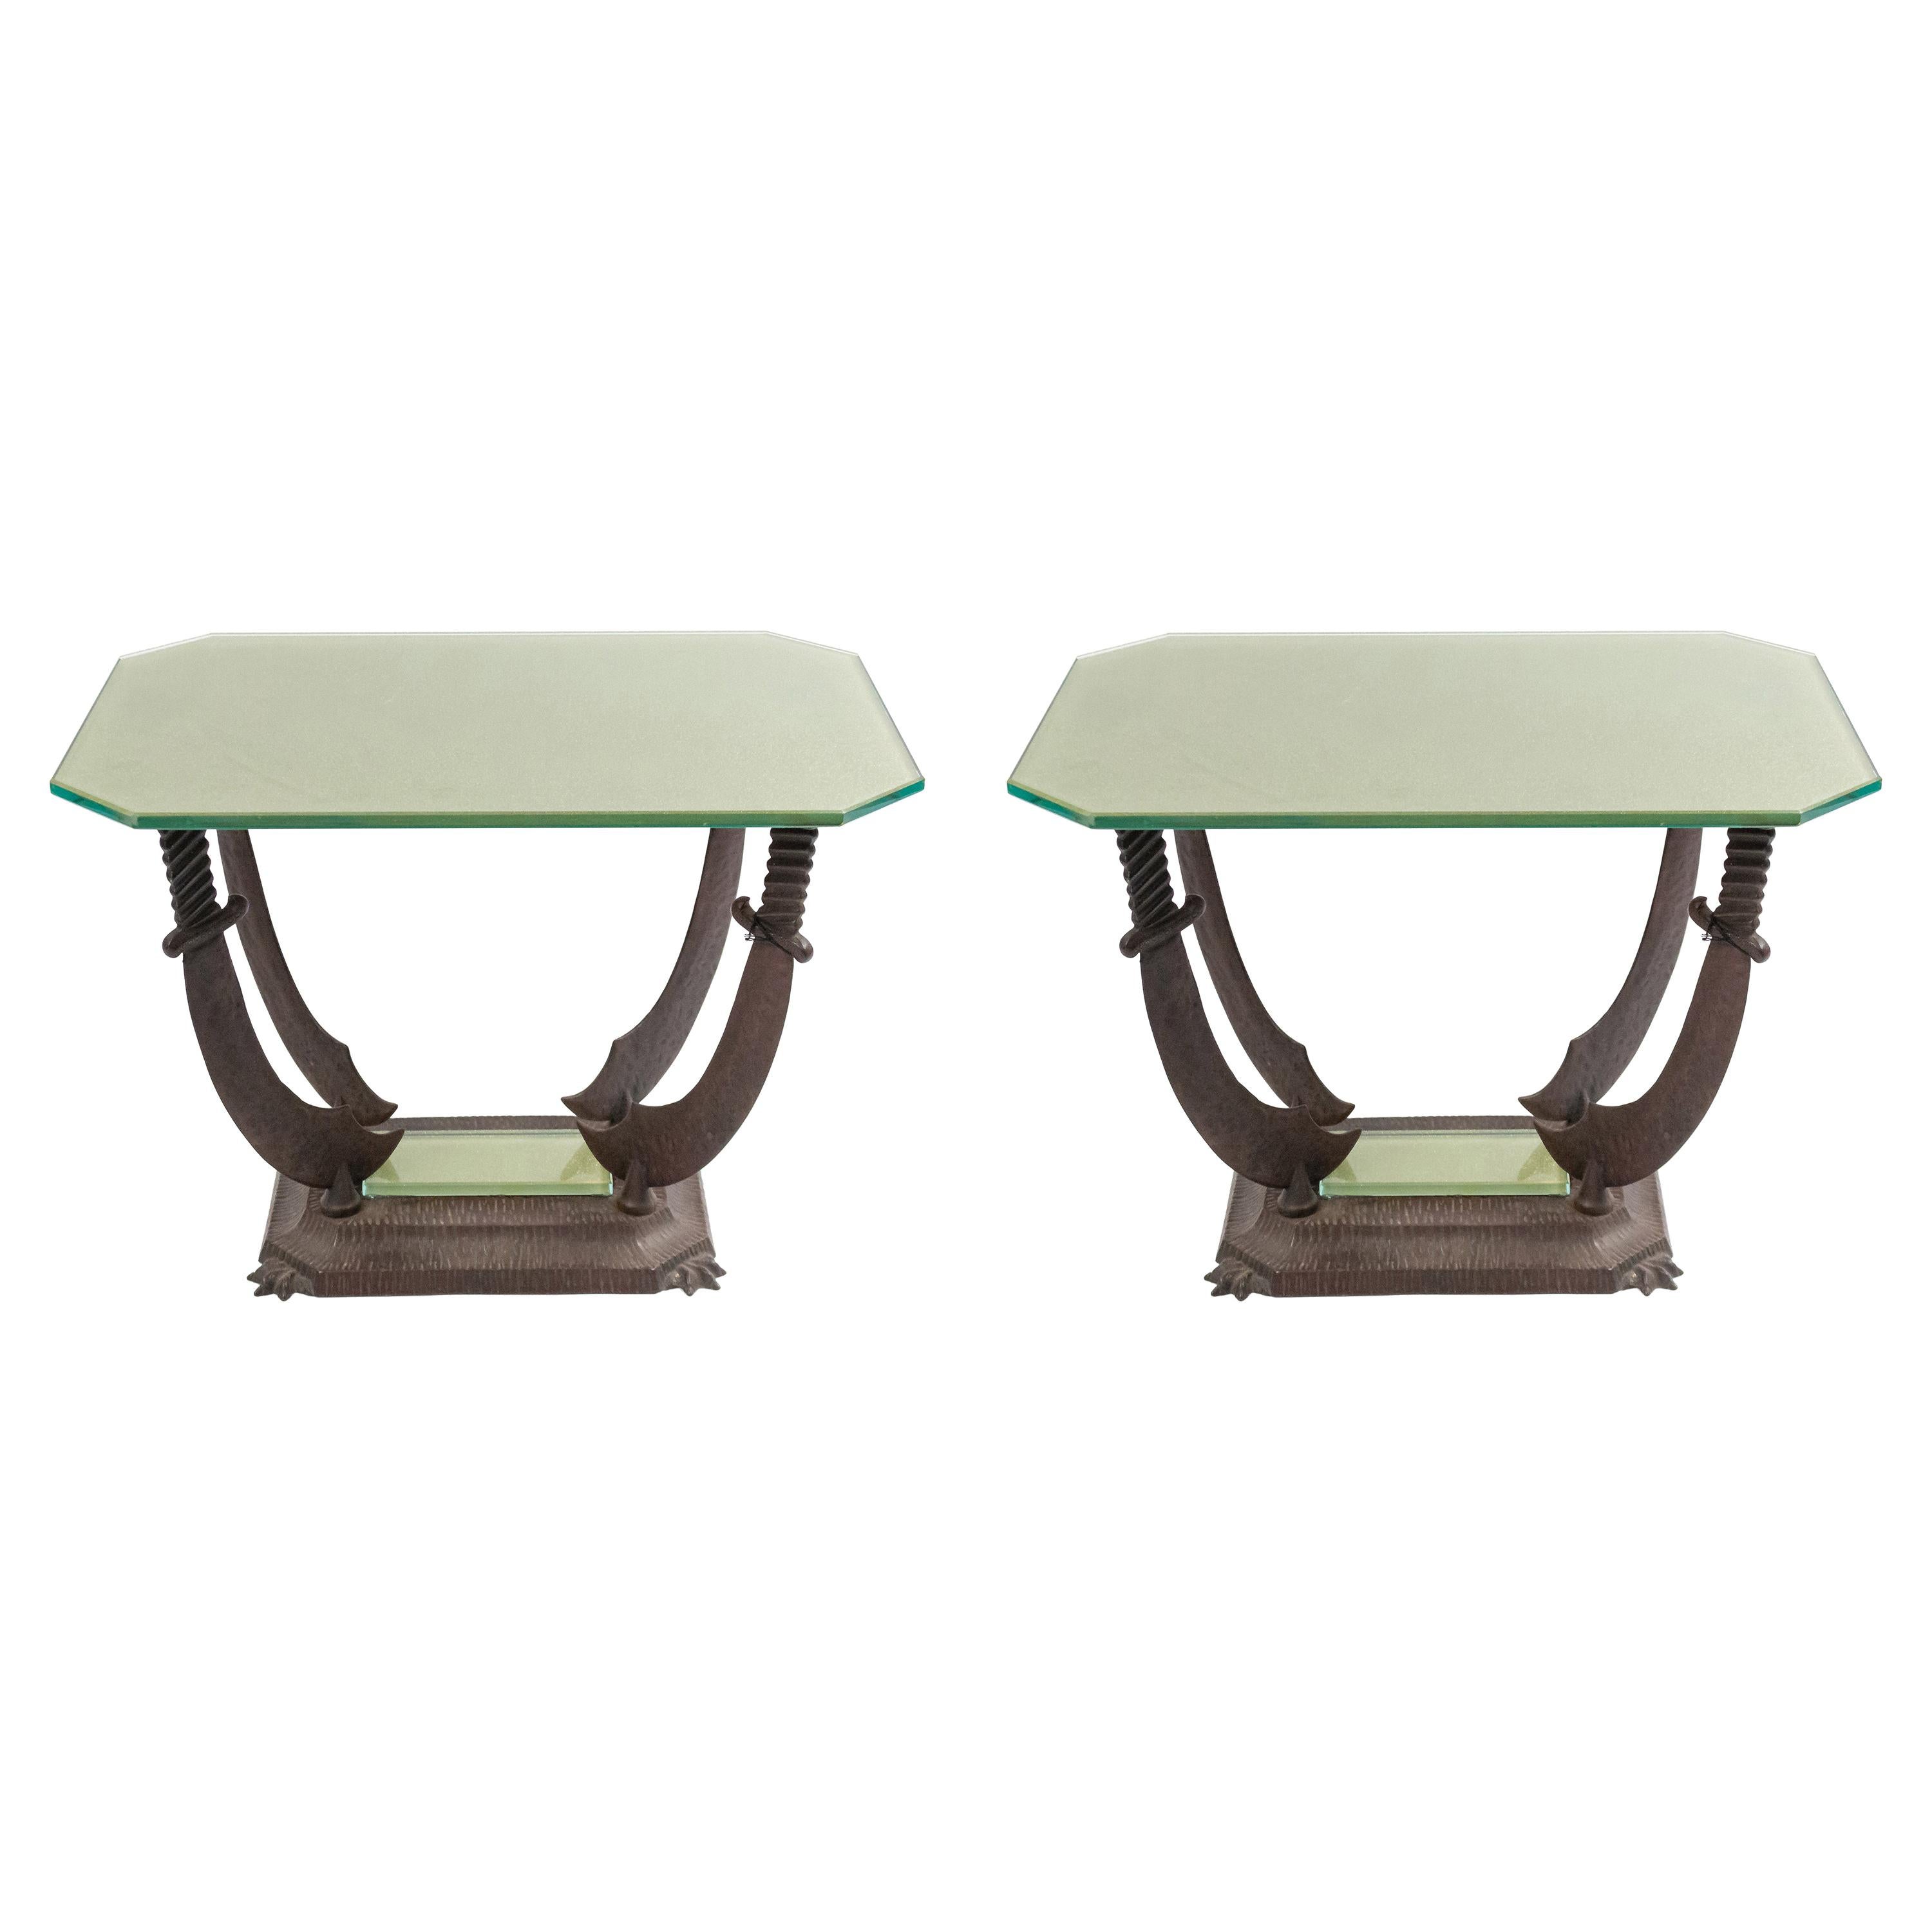 2 early 20th century Italian Renaissance style iron low end tables having a gold glass top supported on 4 sabers resting on a rectangular base (Priced Each).